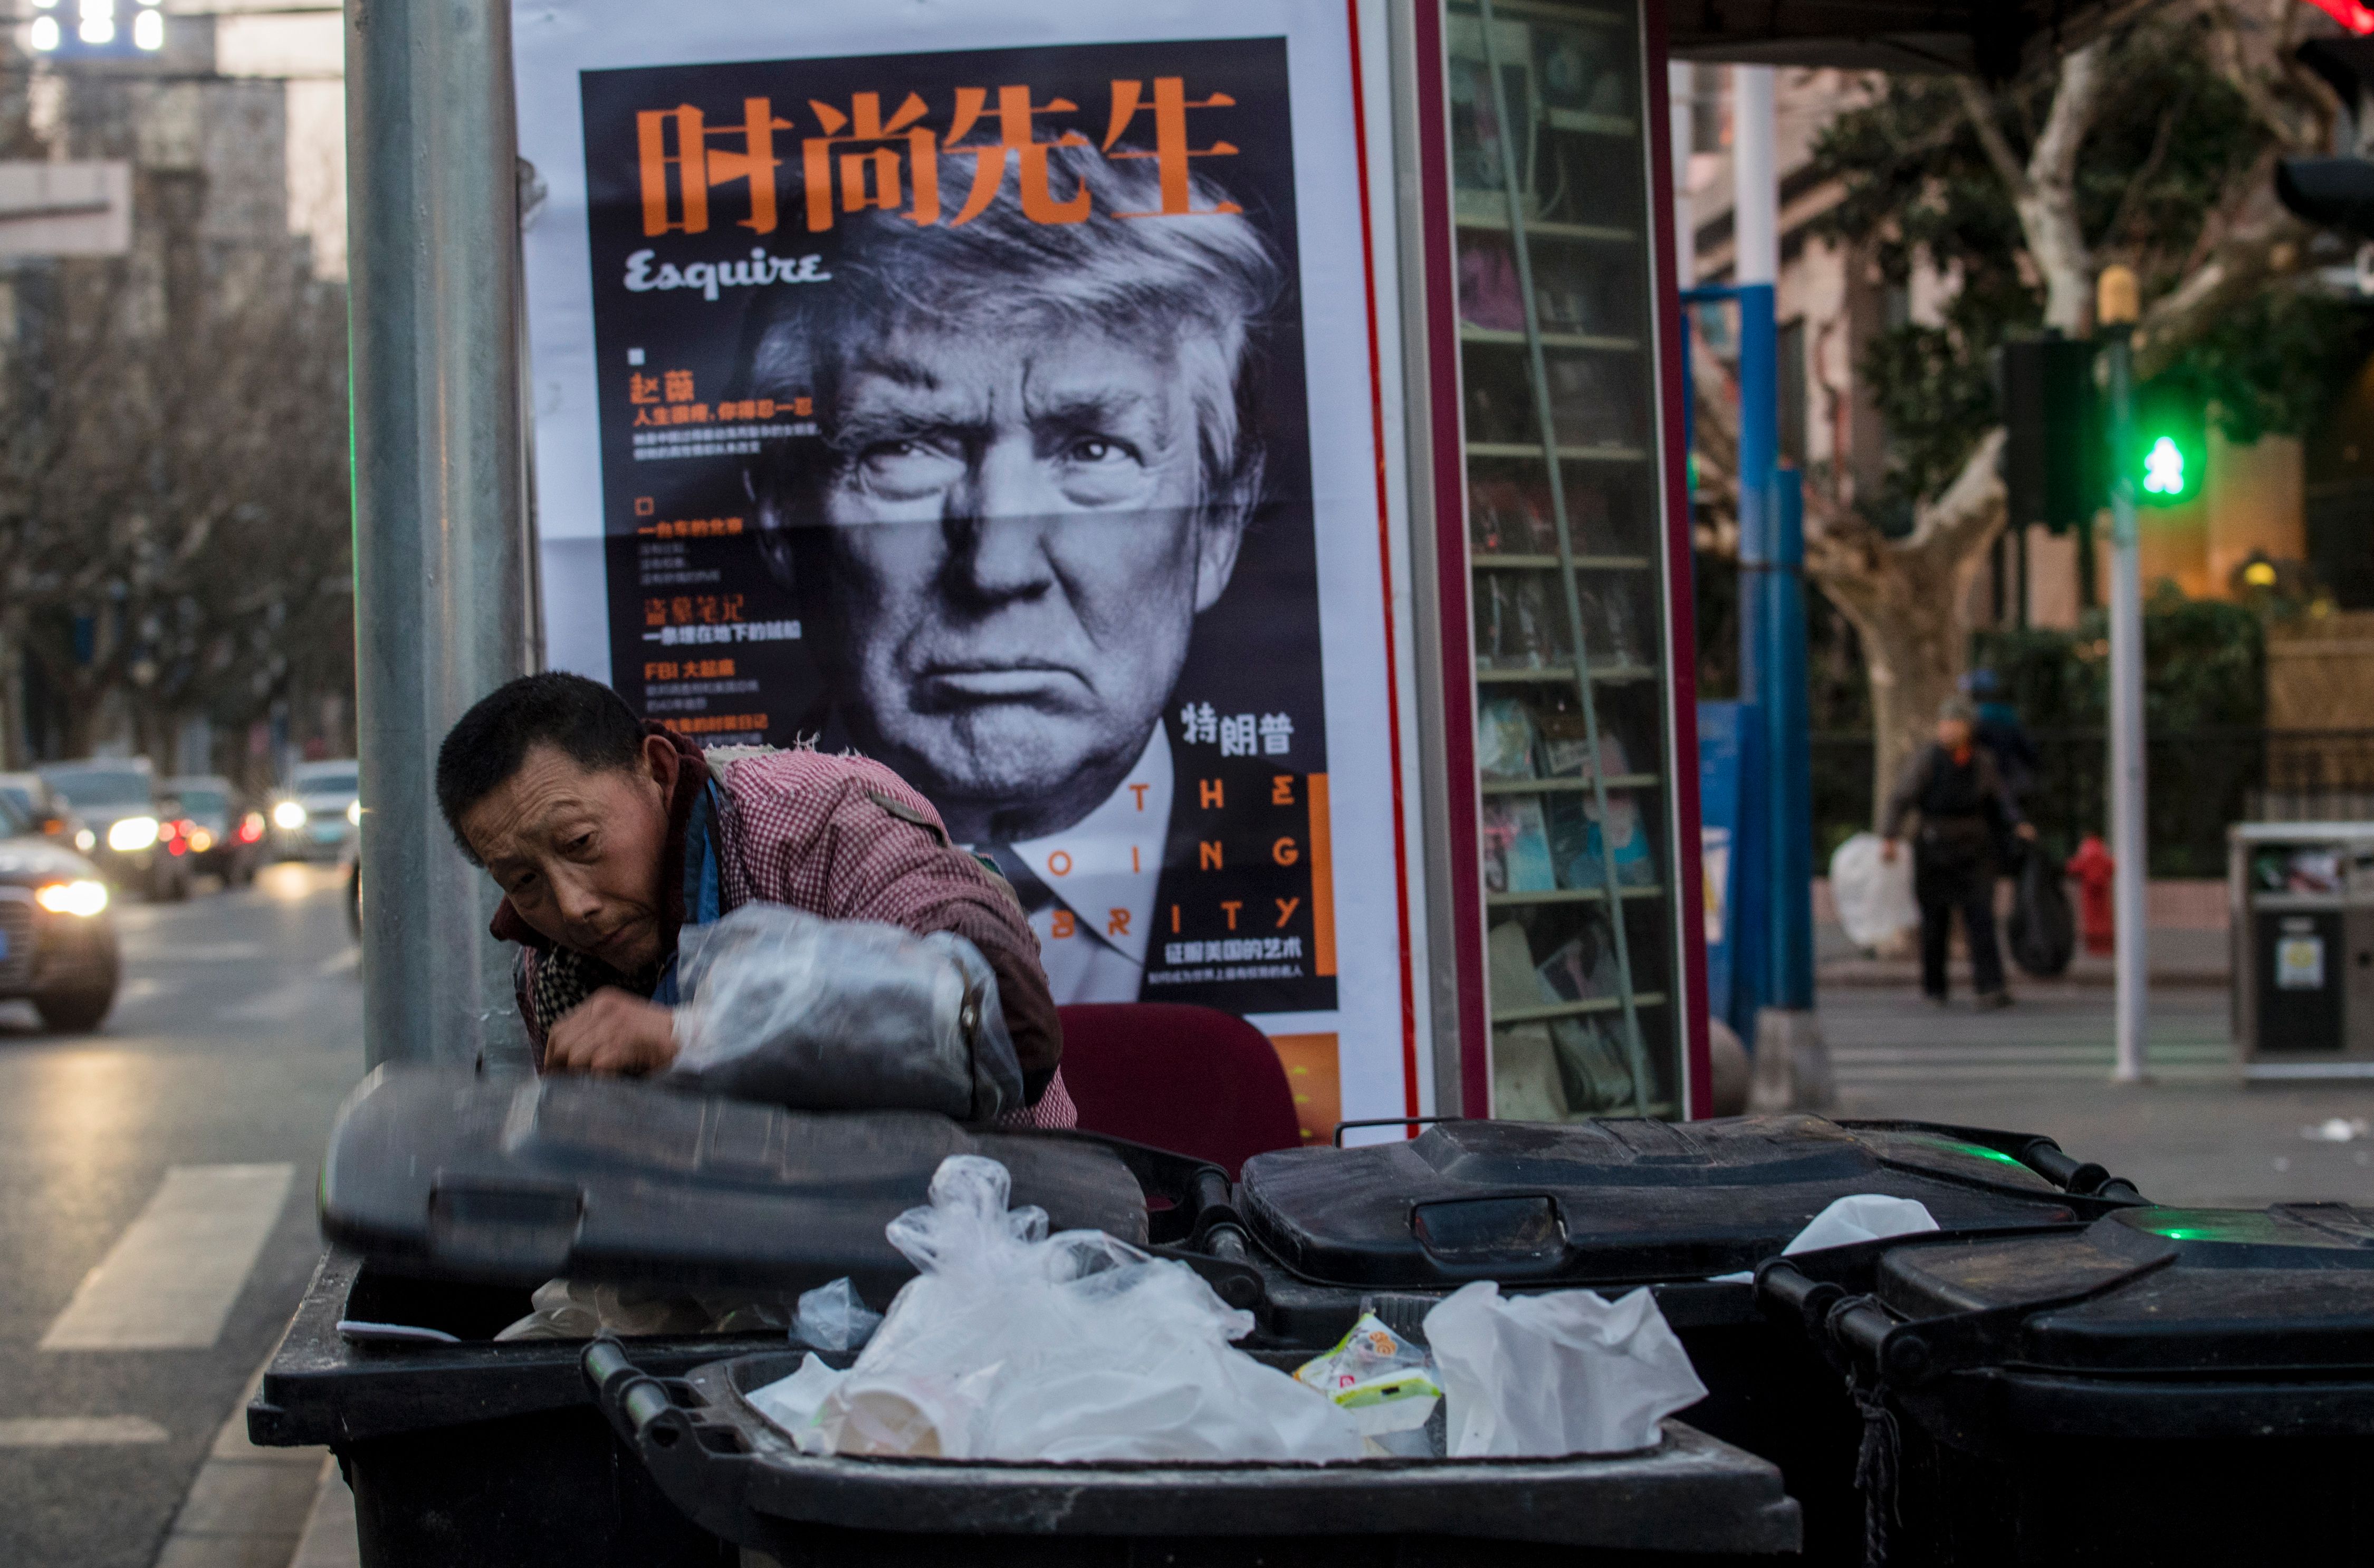 This picture taken on March 2, 2017 shows a man searching rubbish bins in front of an news stand advertising a Chinese newspaper with the front page photo of US President Donald Trump. / (JOHANNES EISELE/AFP via Getty Images)